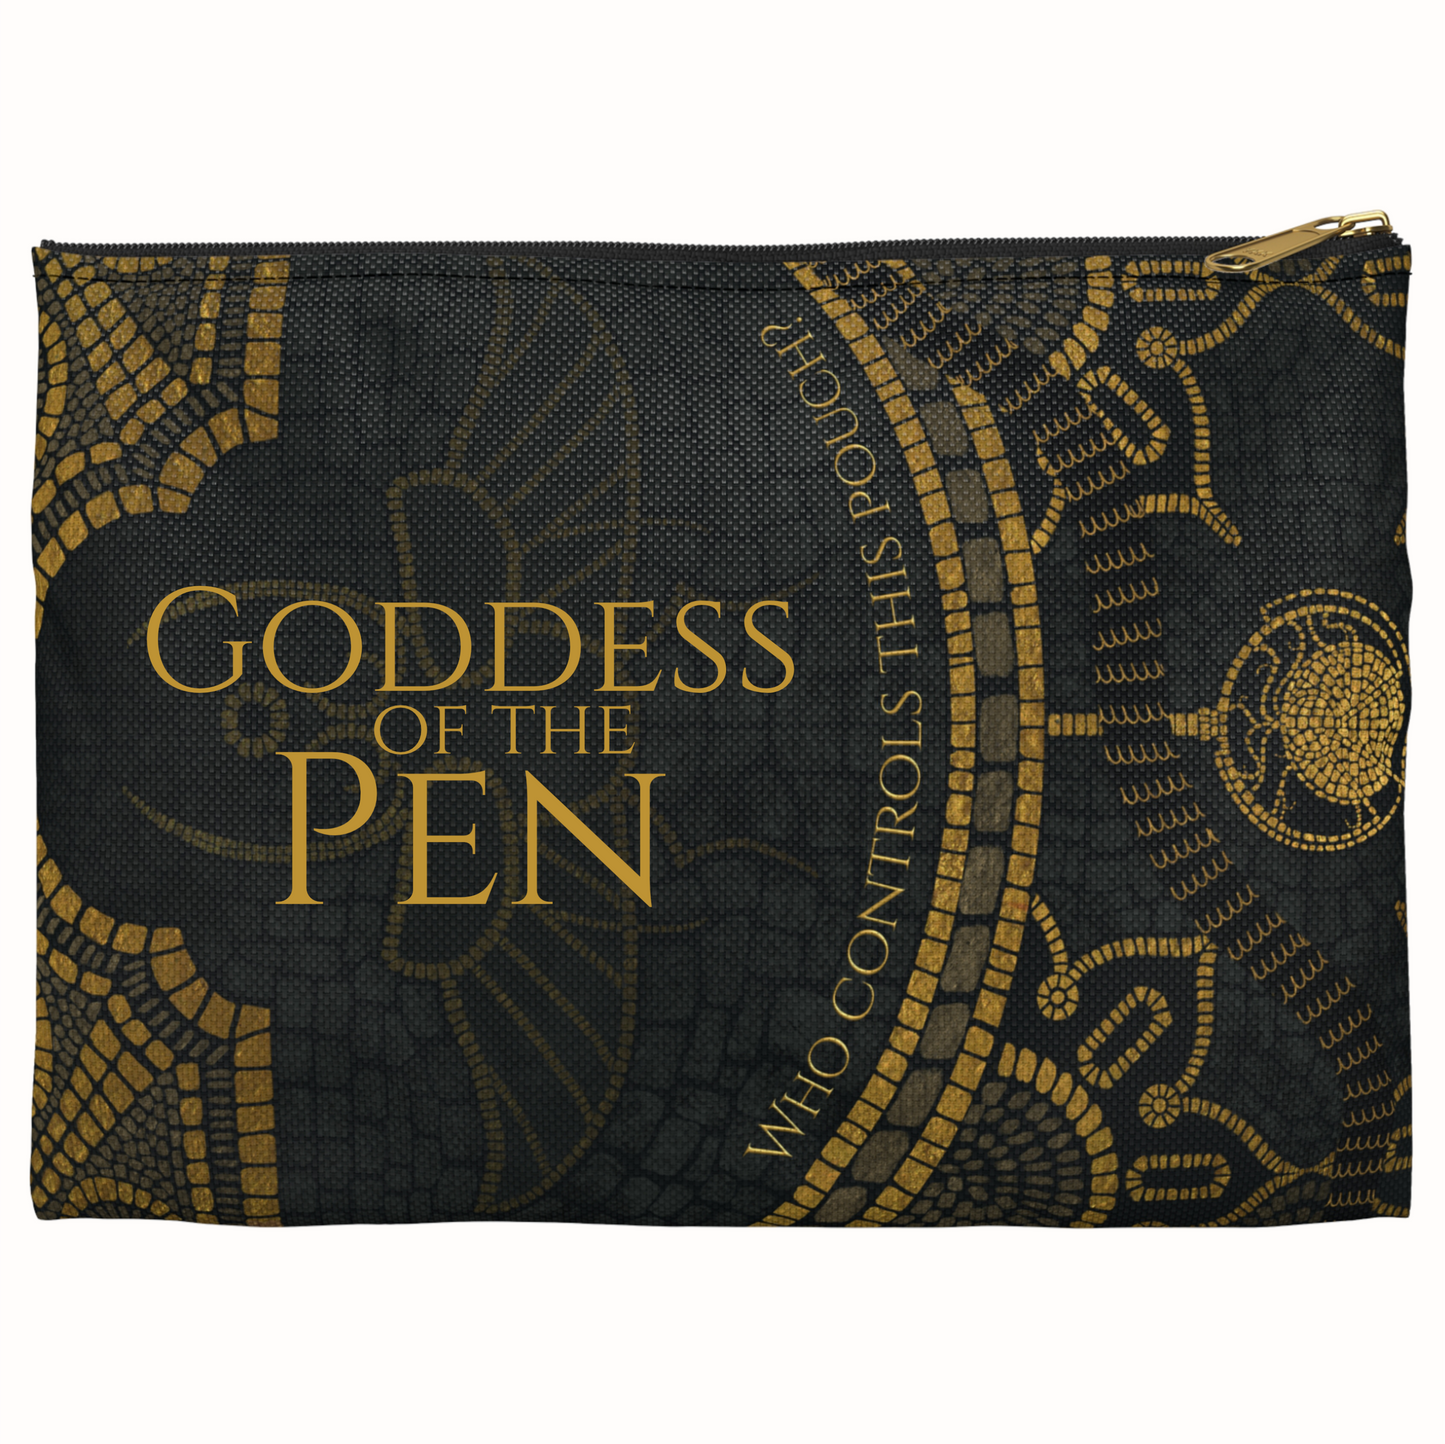 Personalized Dark Queen Pouch - made for you